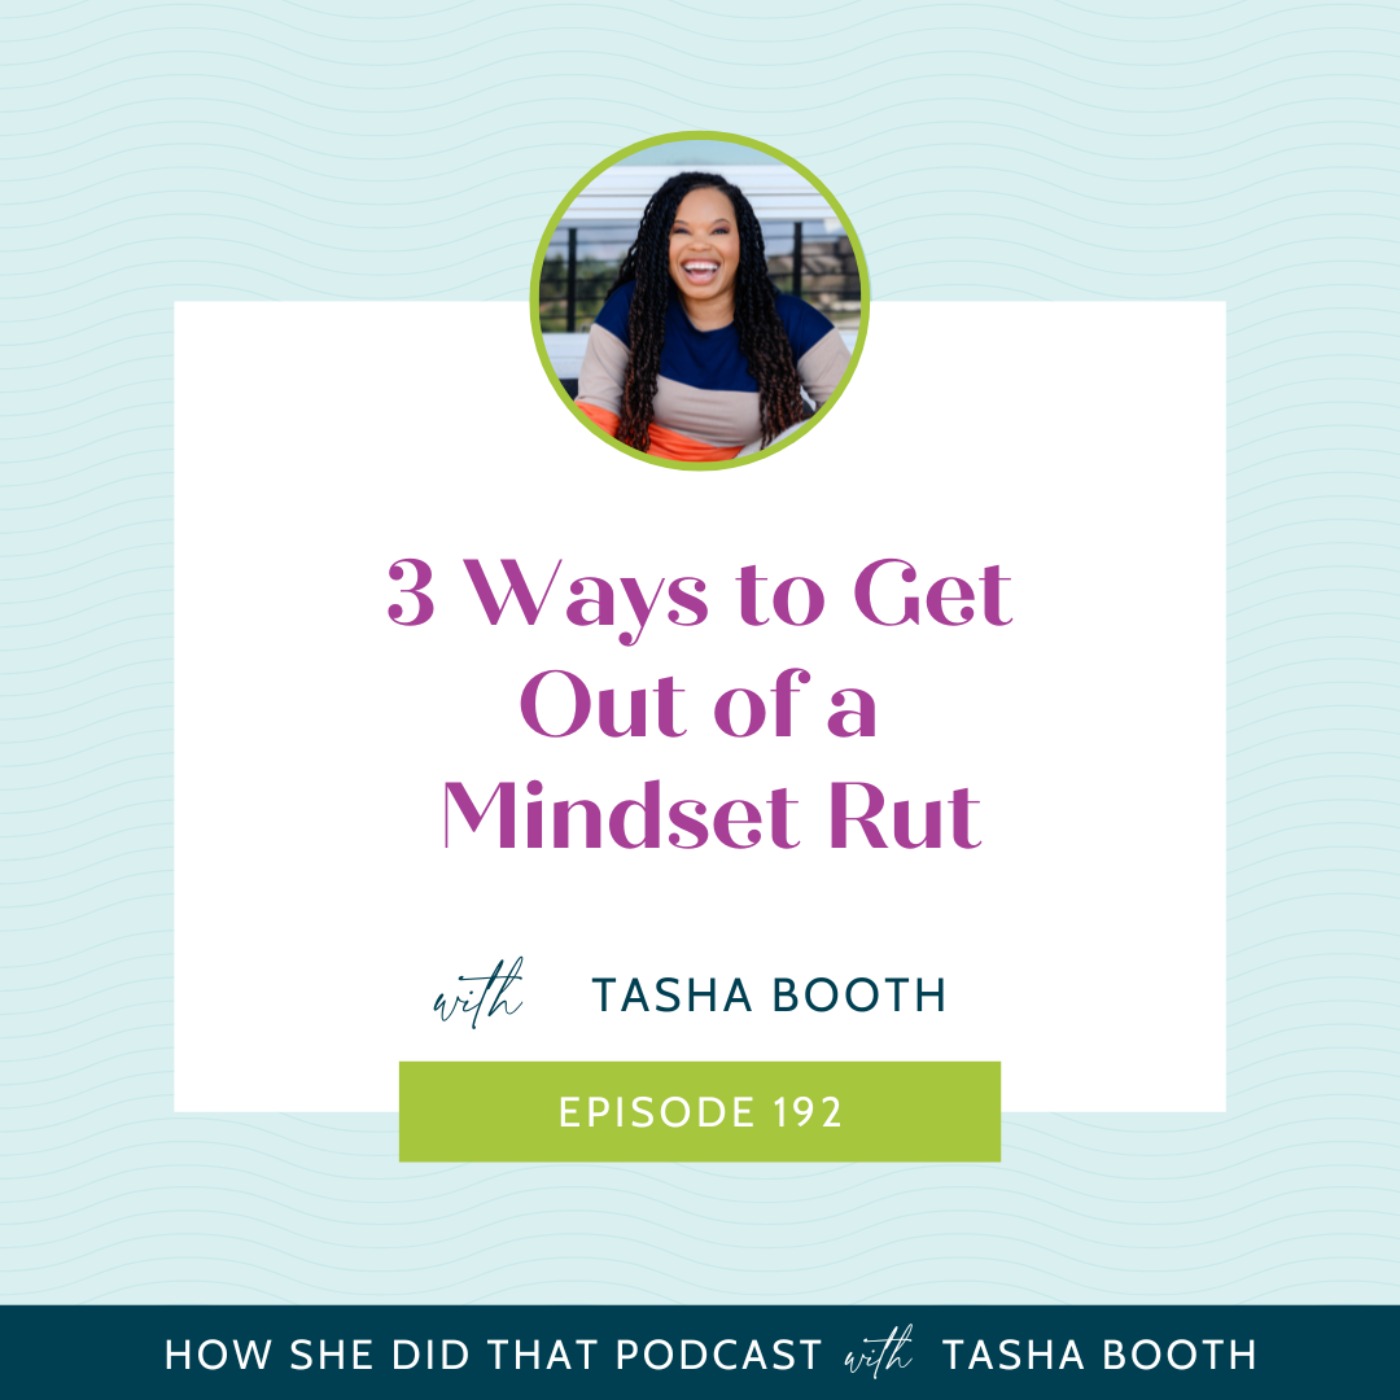 3 Ways to Get Out of a Mindset Rut